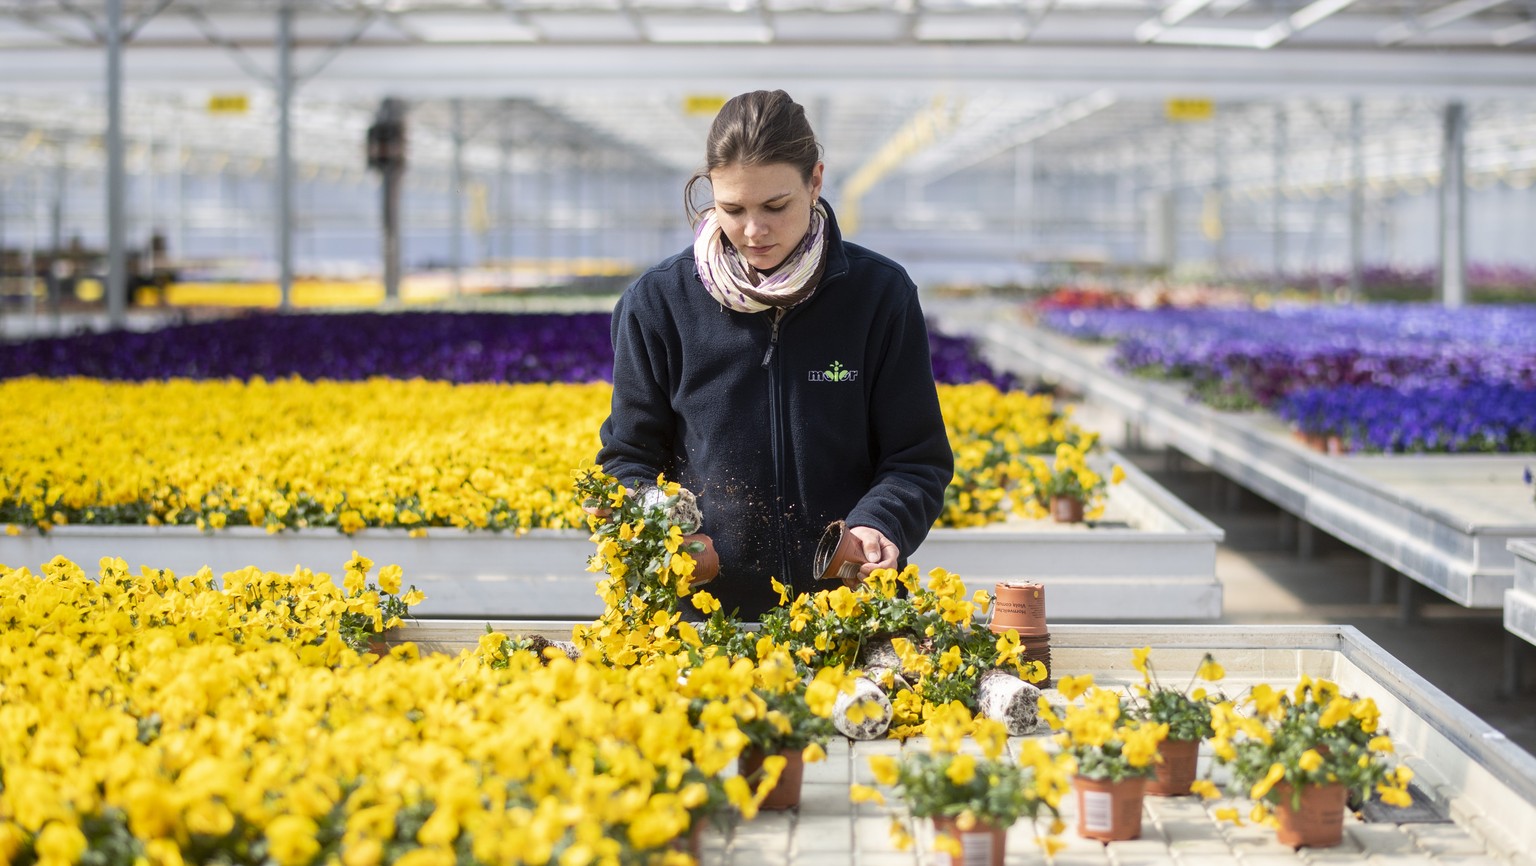 Anita of the nursery &quot;Meier&quot; disposes and composts the cultivated flowers and seedlings that could not be sold during the coronavirus disease (COVID-19) outbreak, in Neftenbach, Switzerland, ...